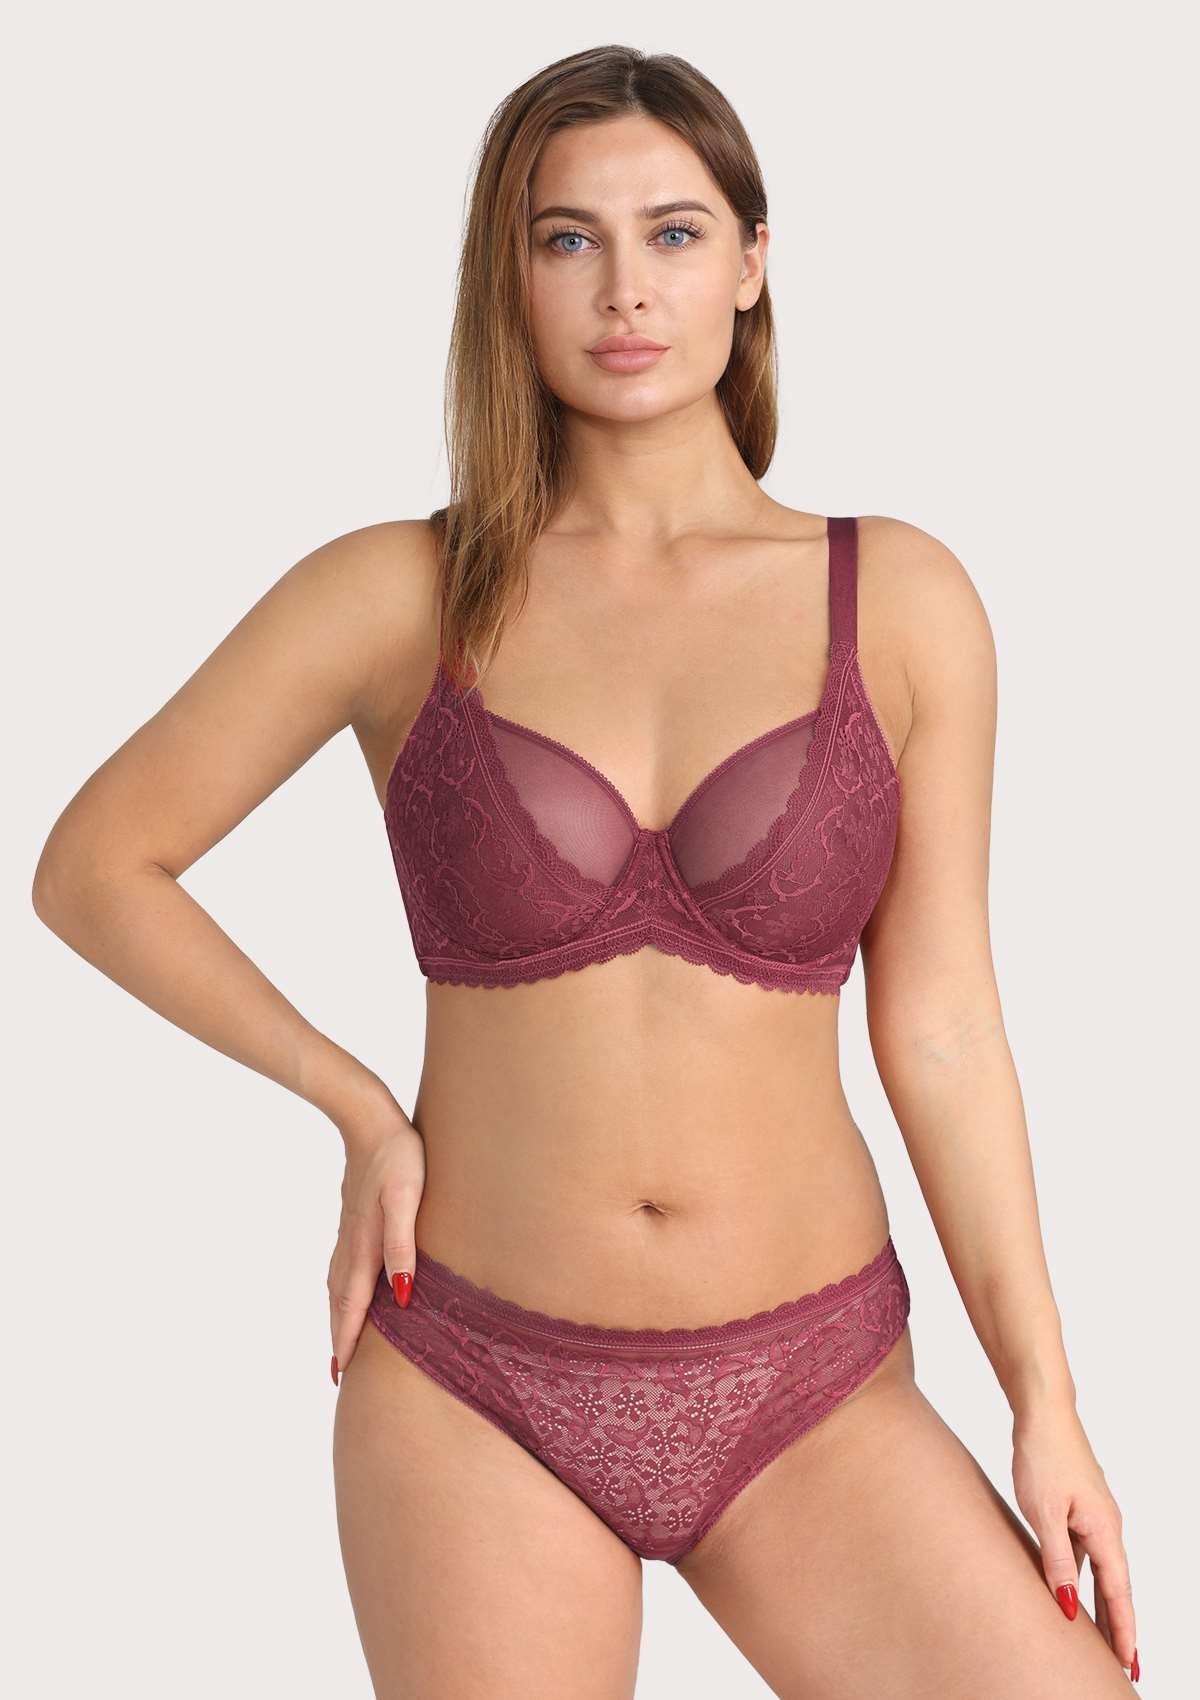 HSIA Anemone Big Bra: Best Bra For Lift And Support, Floral Bra - Burgundy / 42 / C